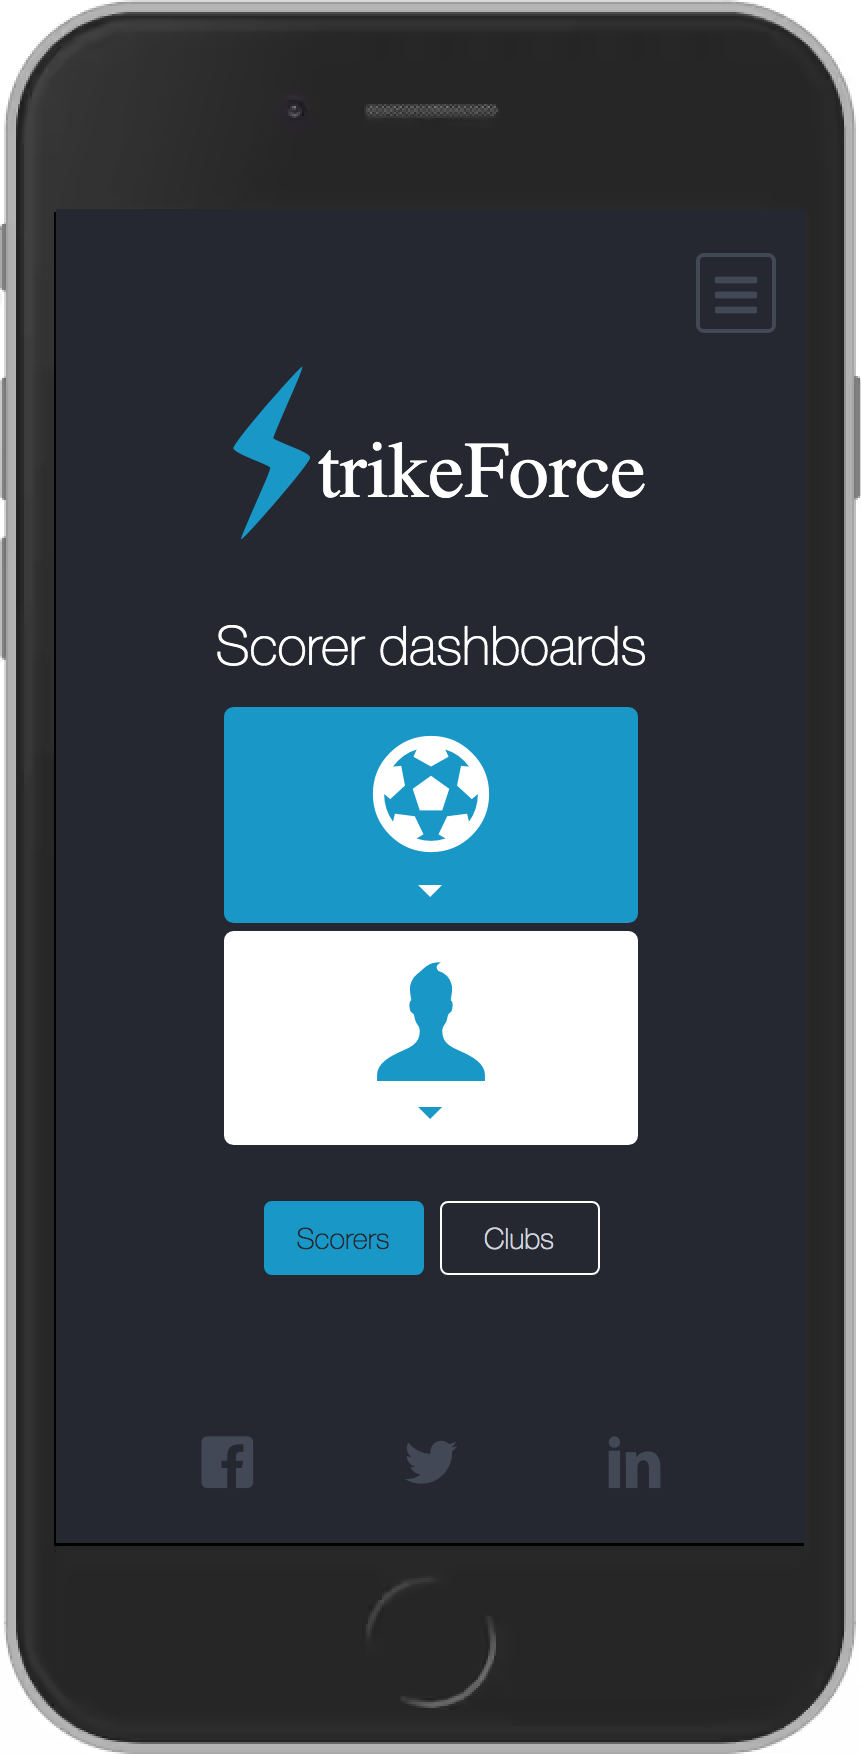 StrikeForce Dashboards page Scorers second dropdown